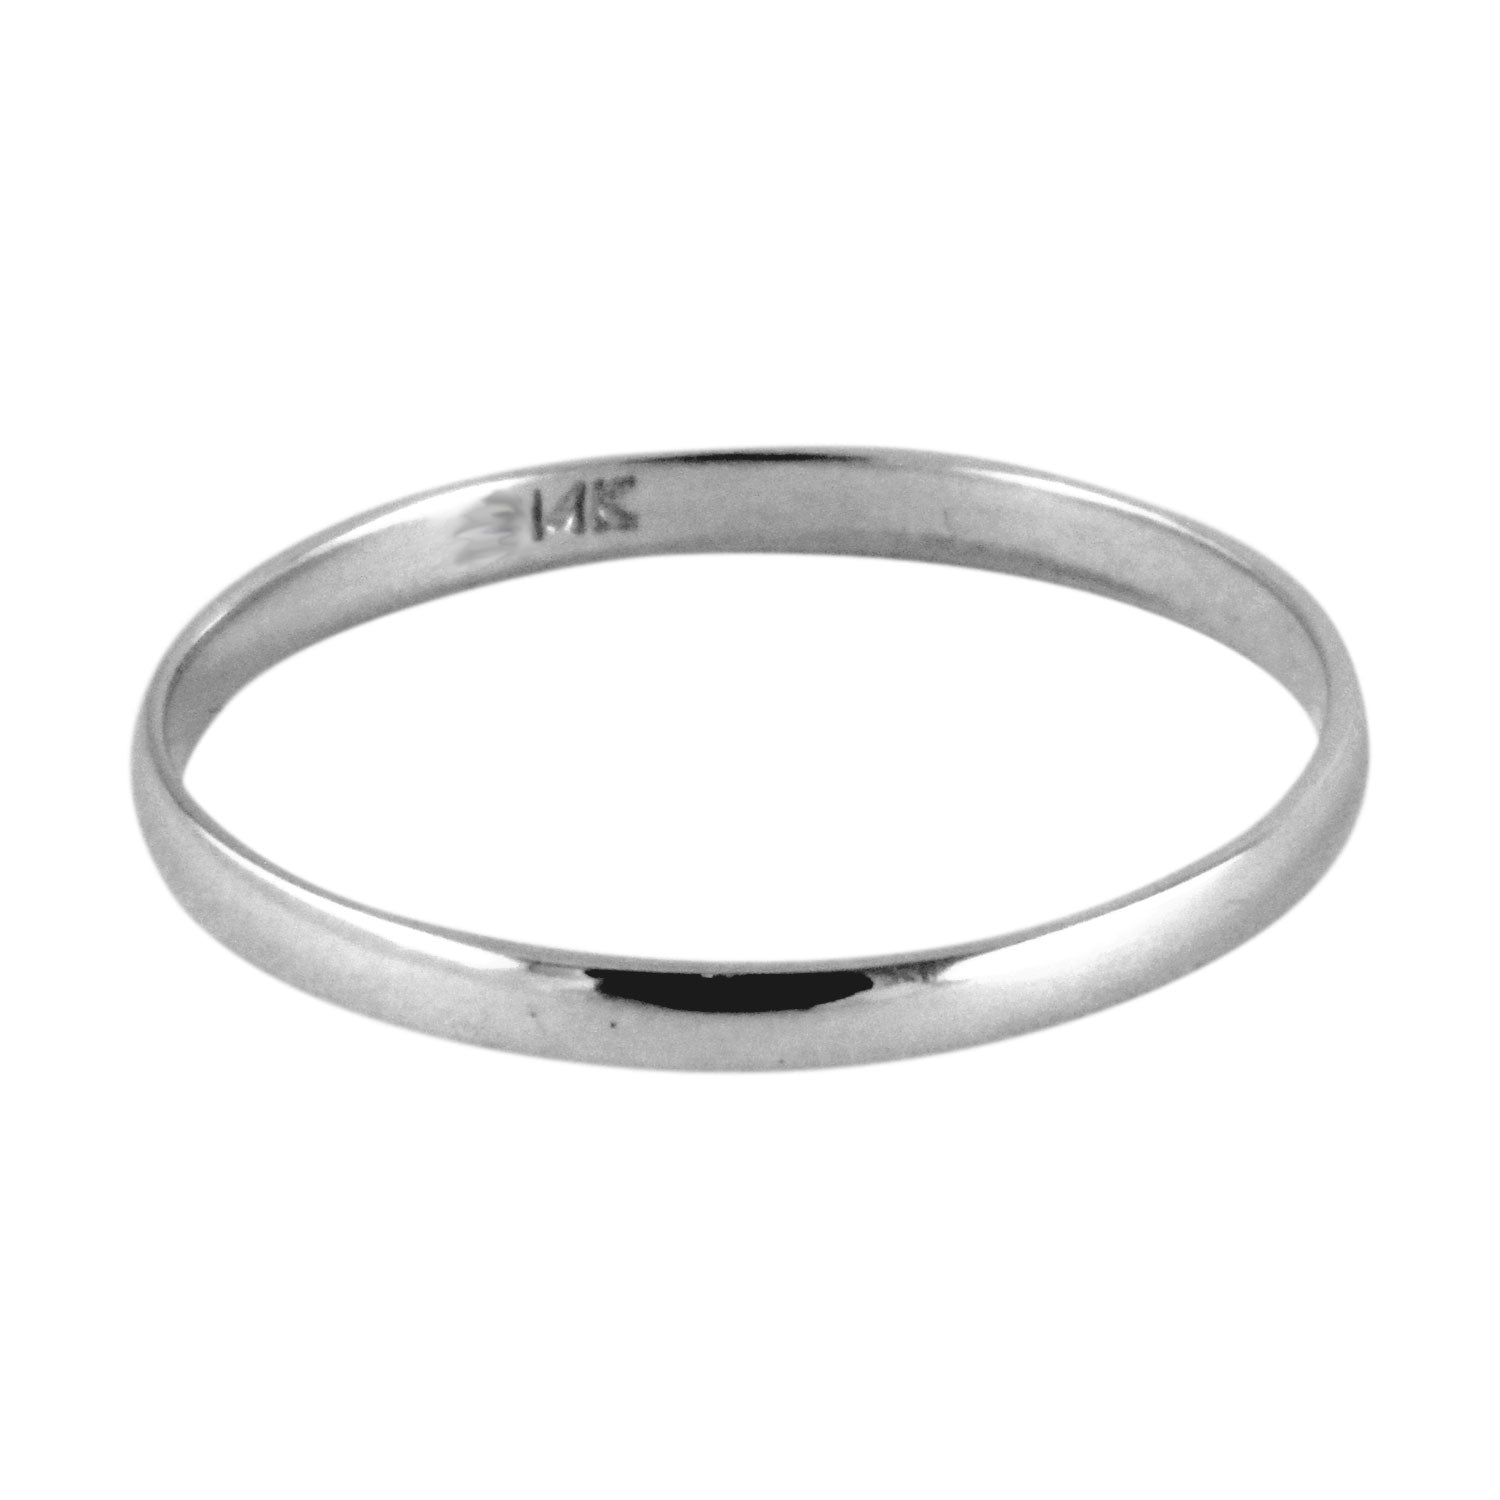 14k White Gold Classic Band Ring